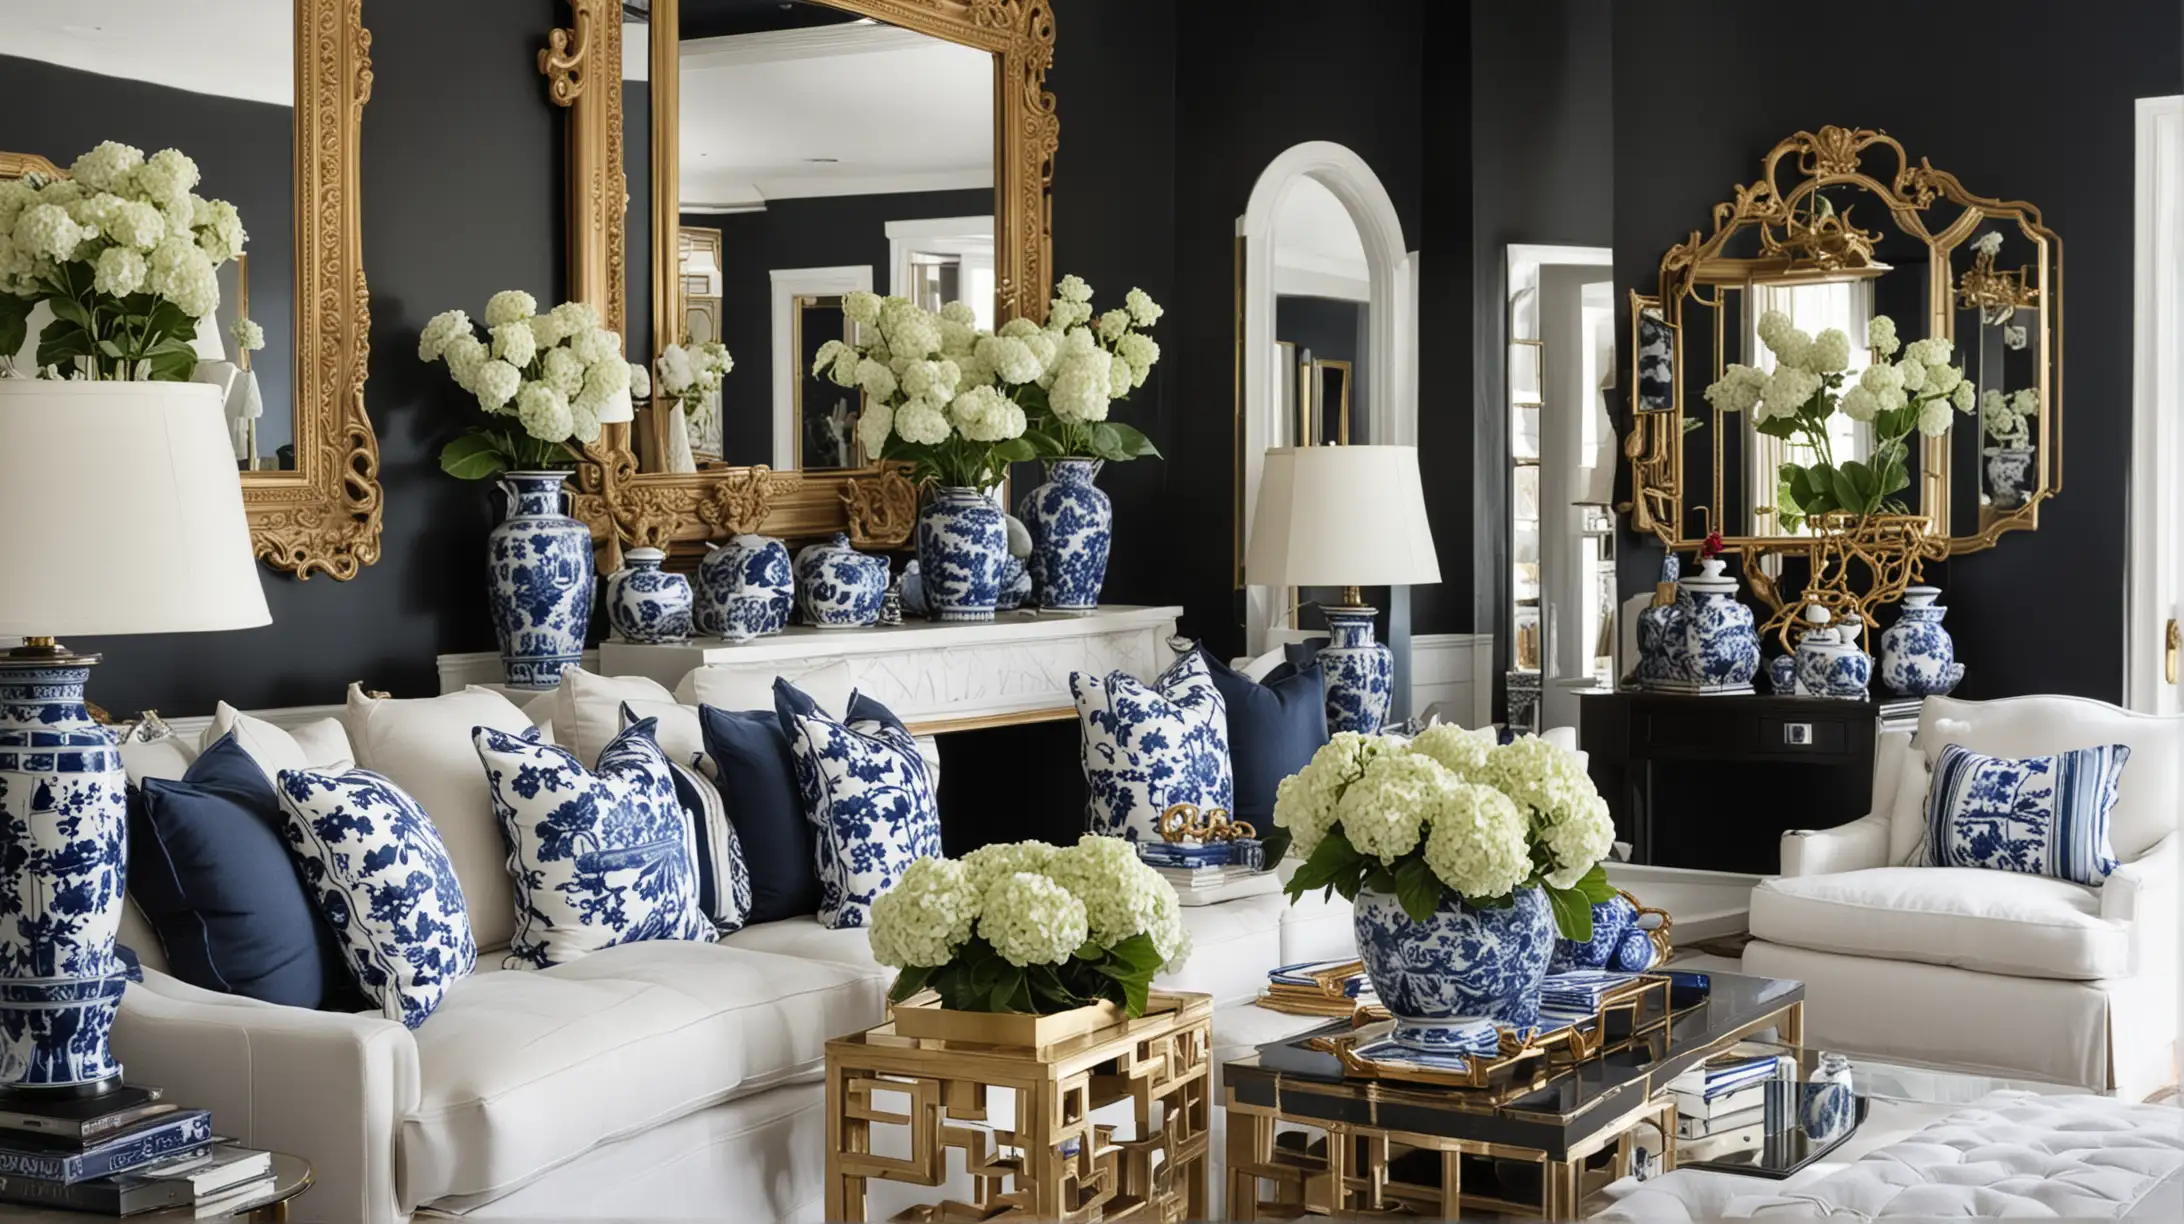 Elegant Formal Living Room with Black Walls and Chinoiserie Vase